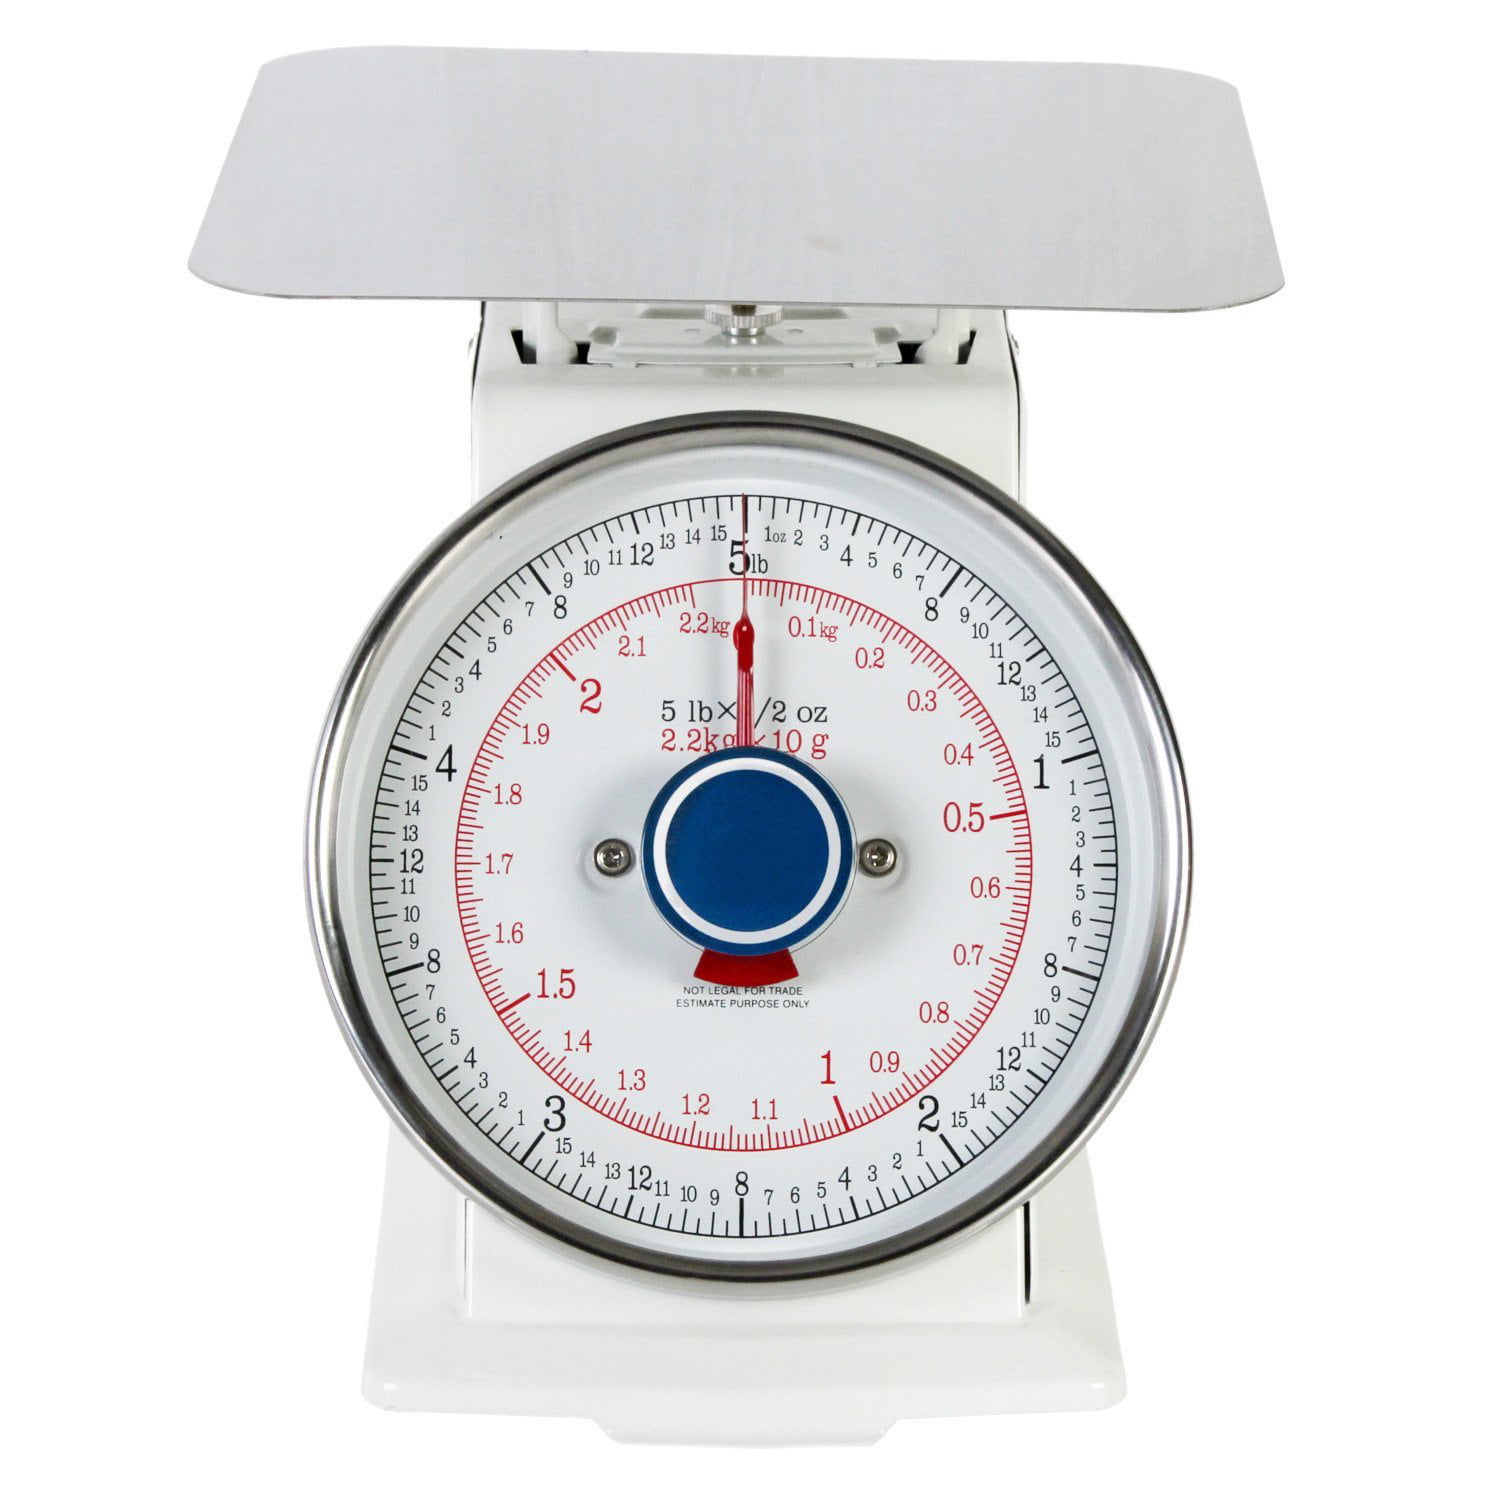 Waterproof Food Scale, 500/0.01g High Precision, Washable - 500g/0.01g